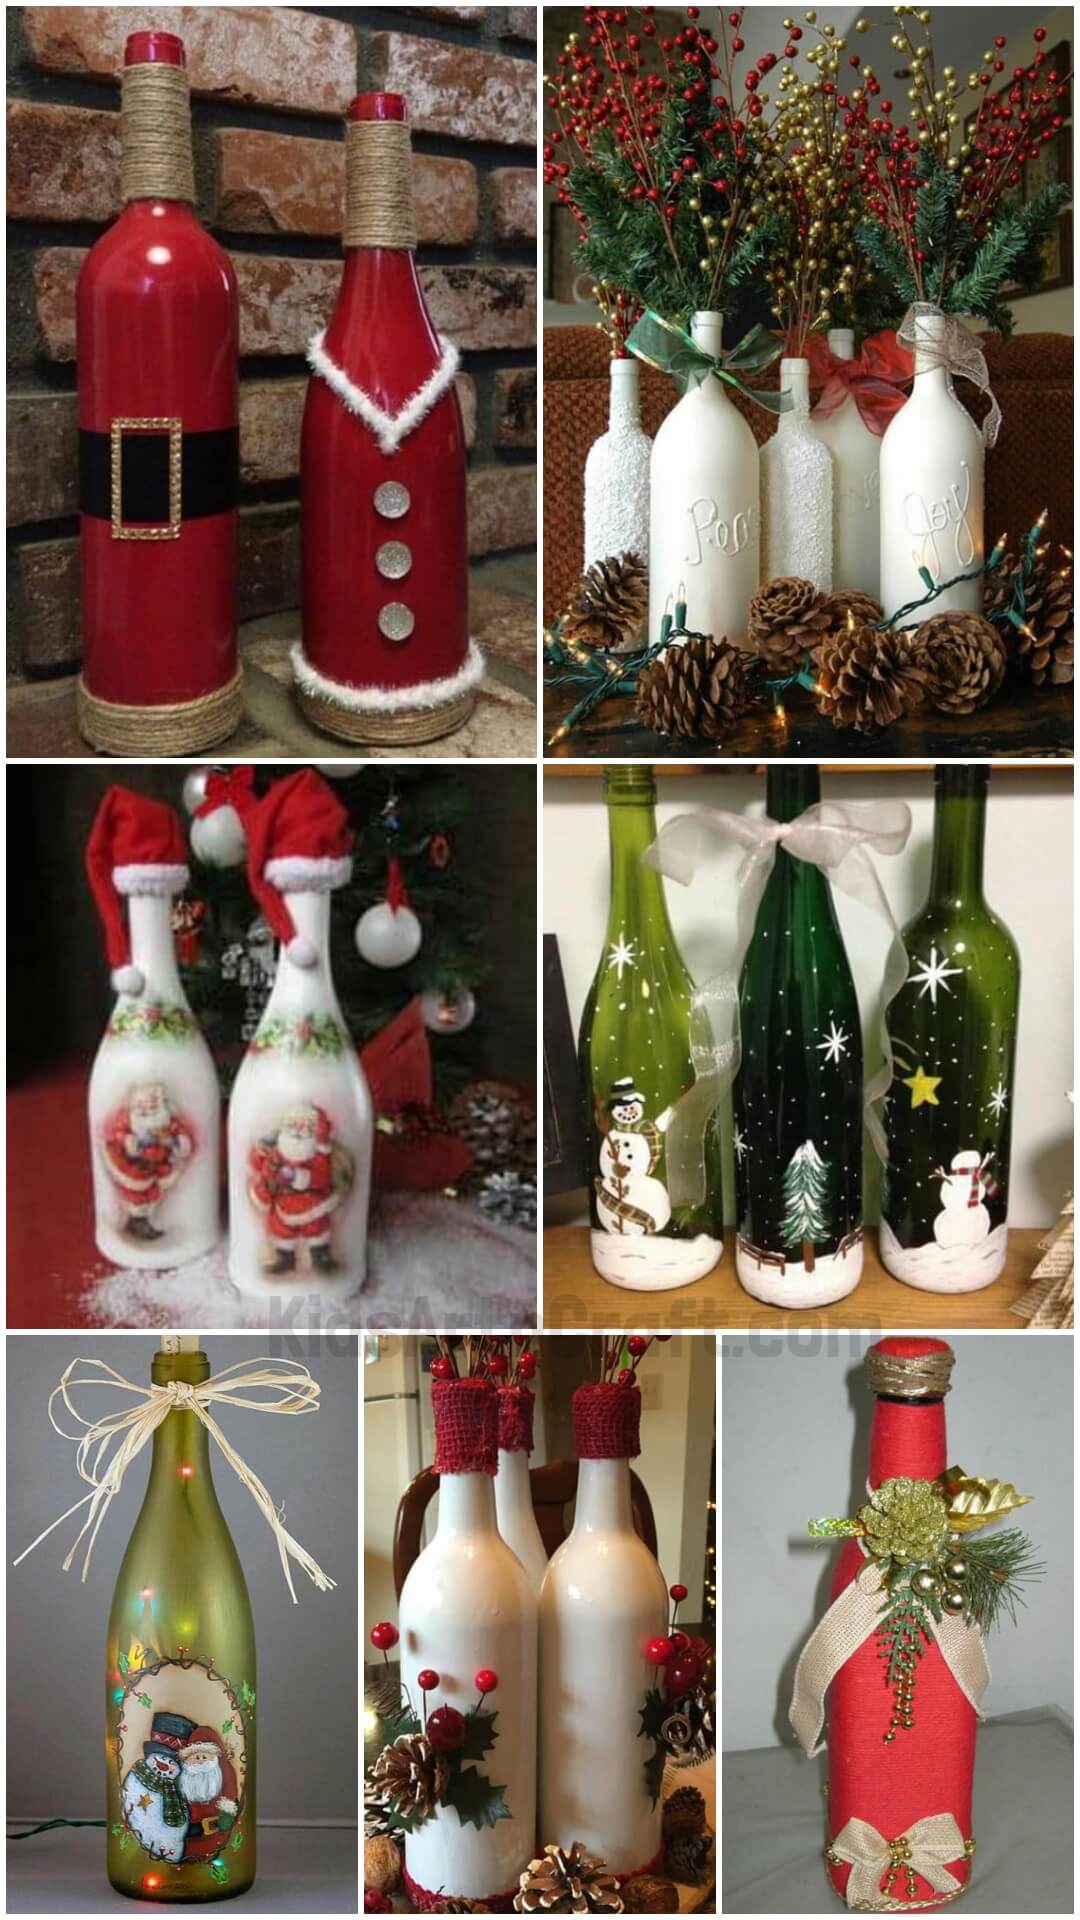 Christmas Ideas with Up-cycled Wine Bottles